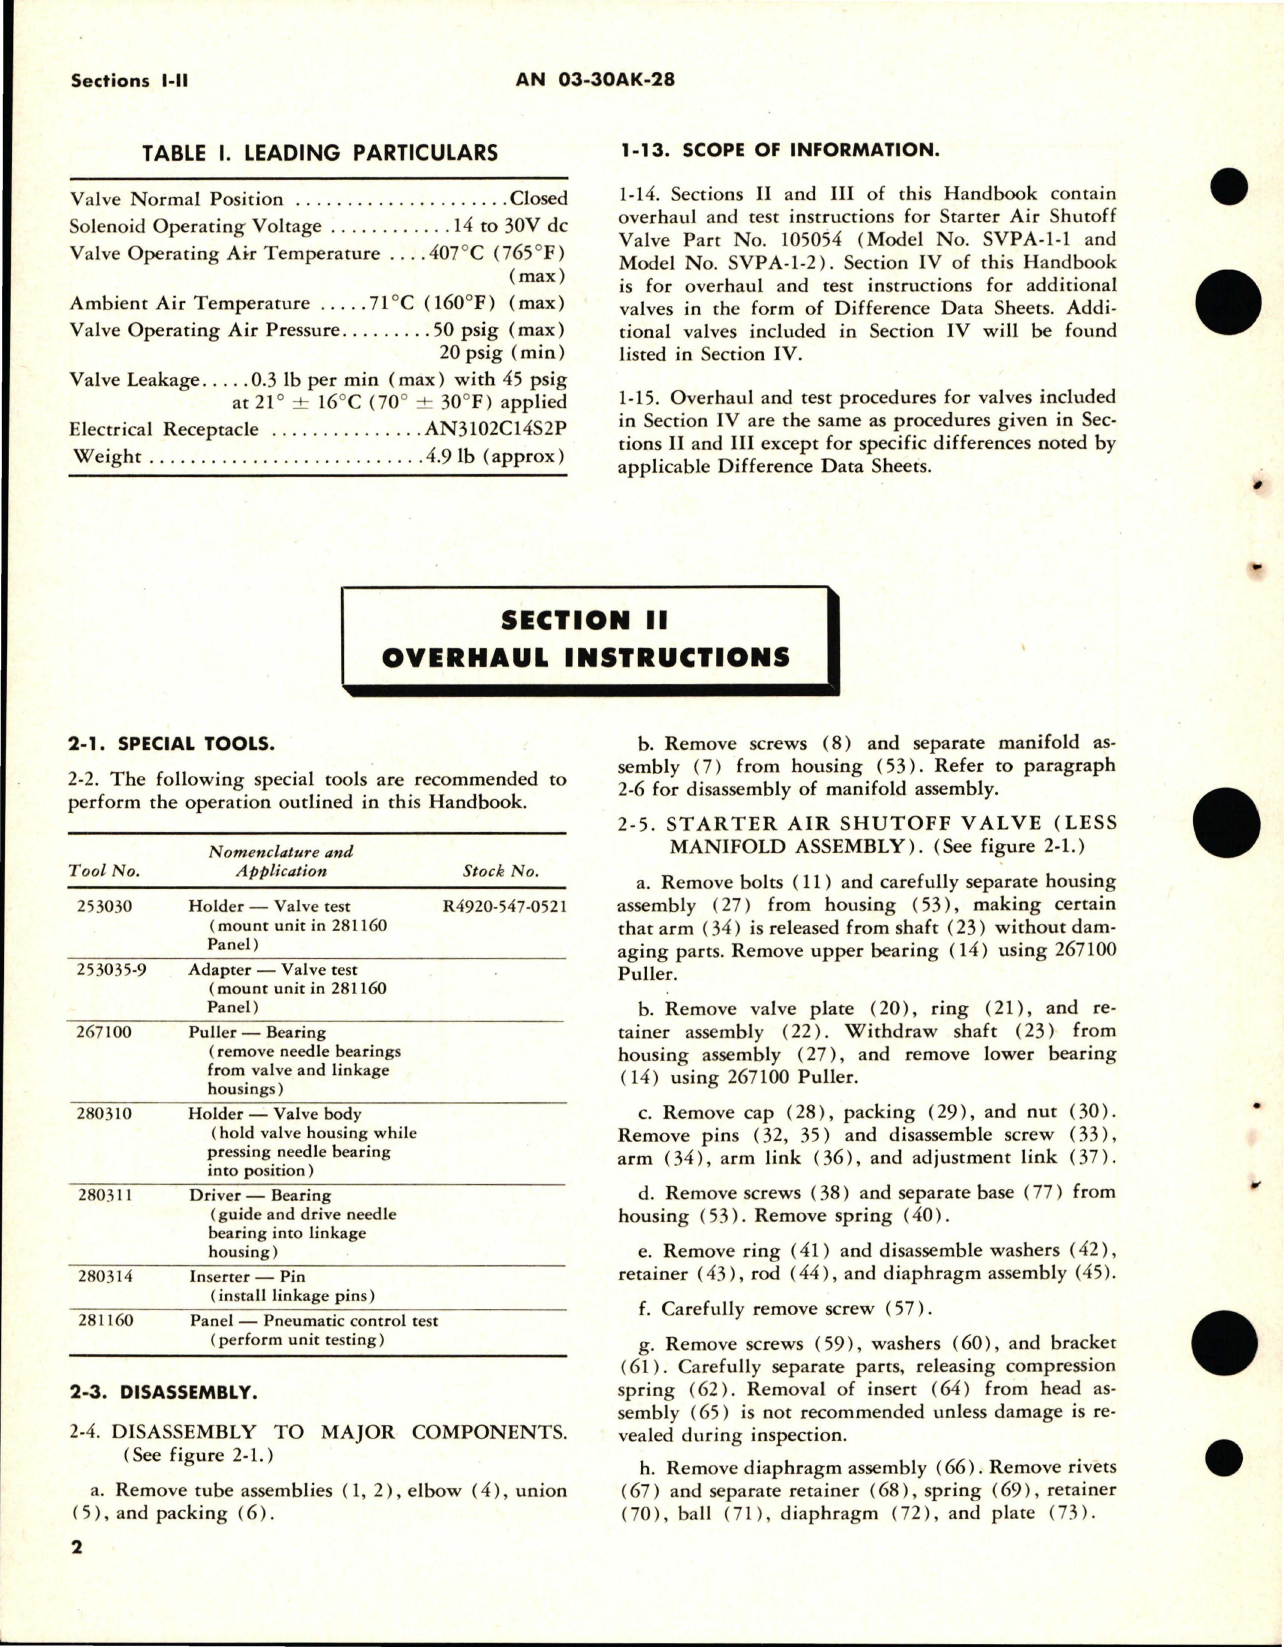 Sample page 6 from AirCorps Library document: Overhaul Instructions for Starter Air Shutoff Valve - Part 105054 - Model SVPA-1 